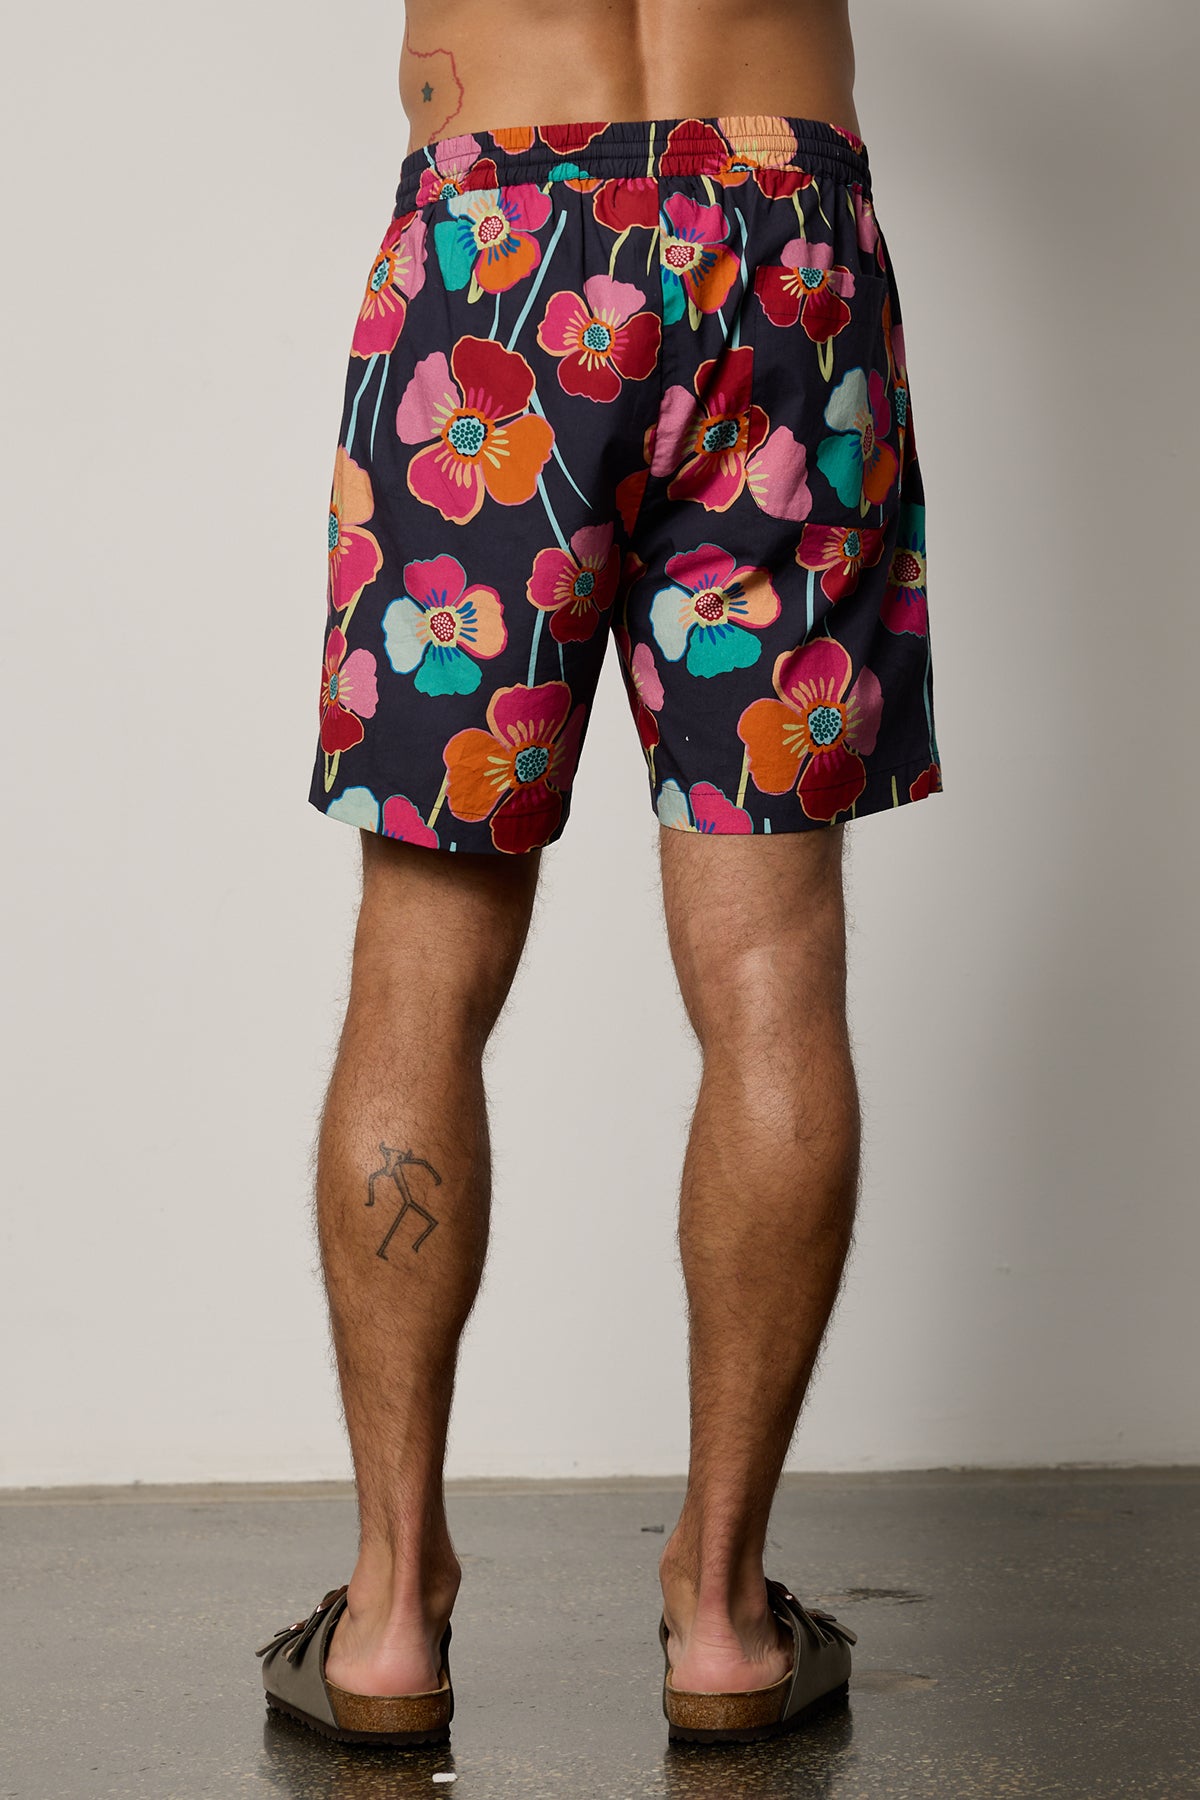   Colt Short back in bahama print with bold, multi colored floral pattern with dark background 